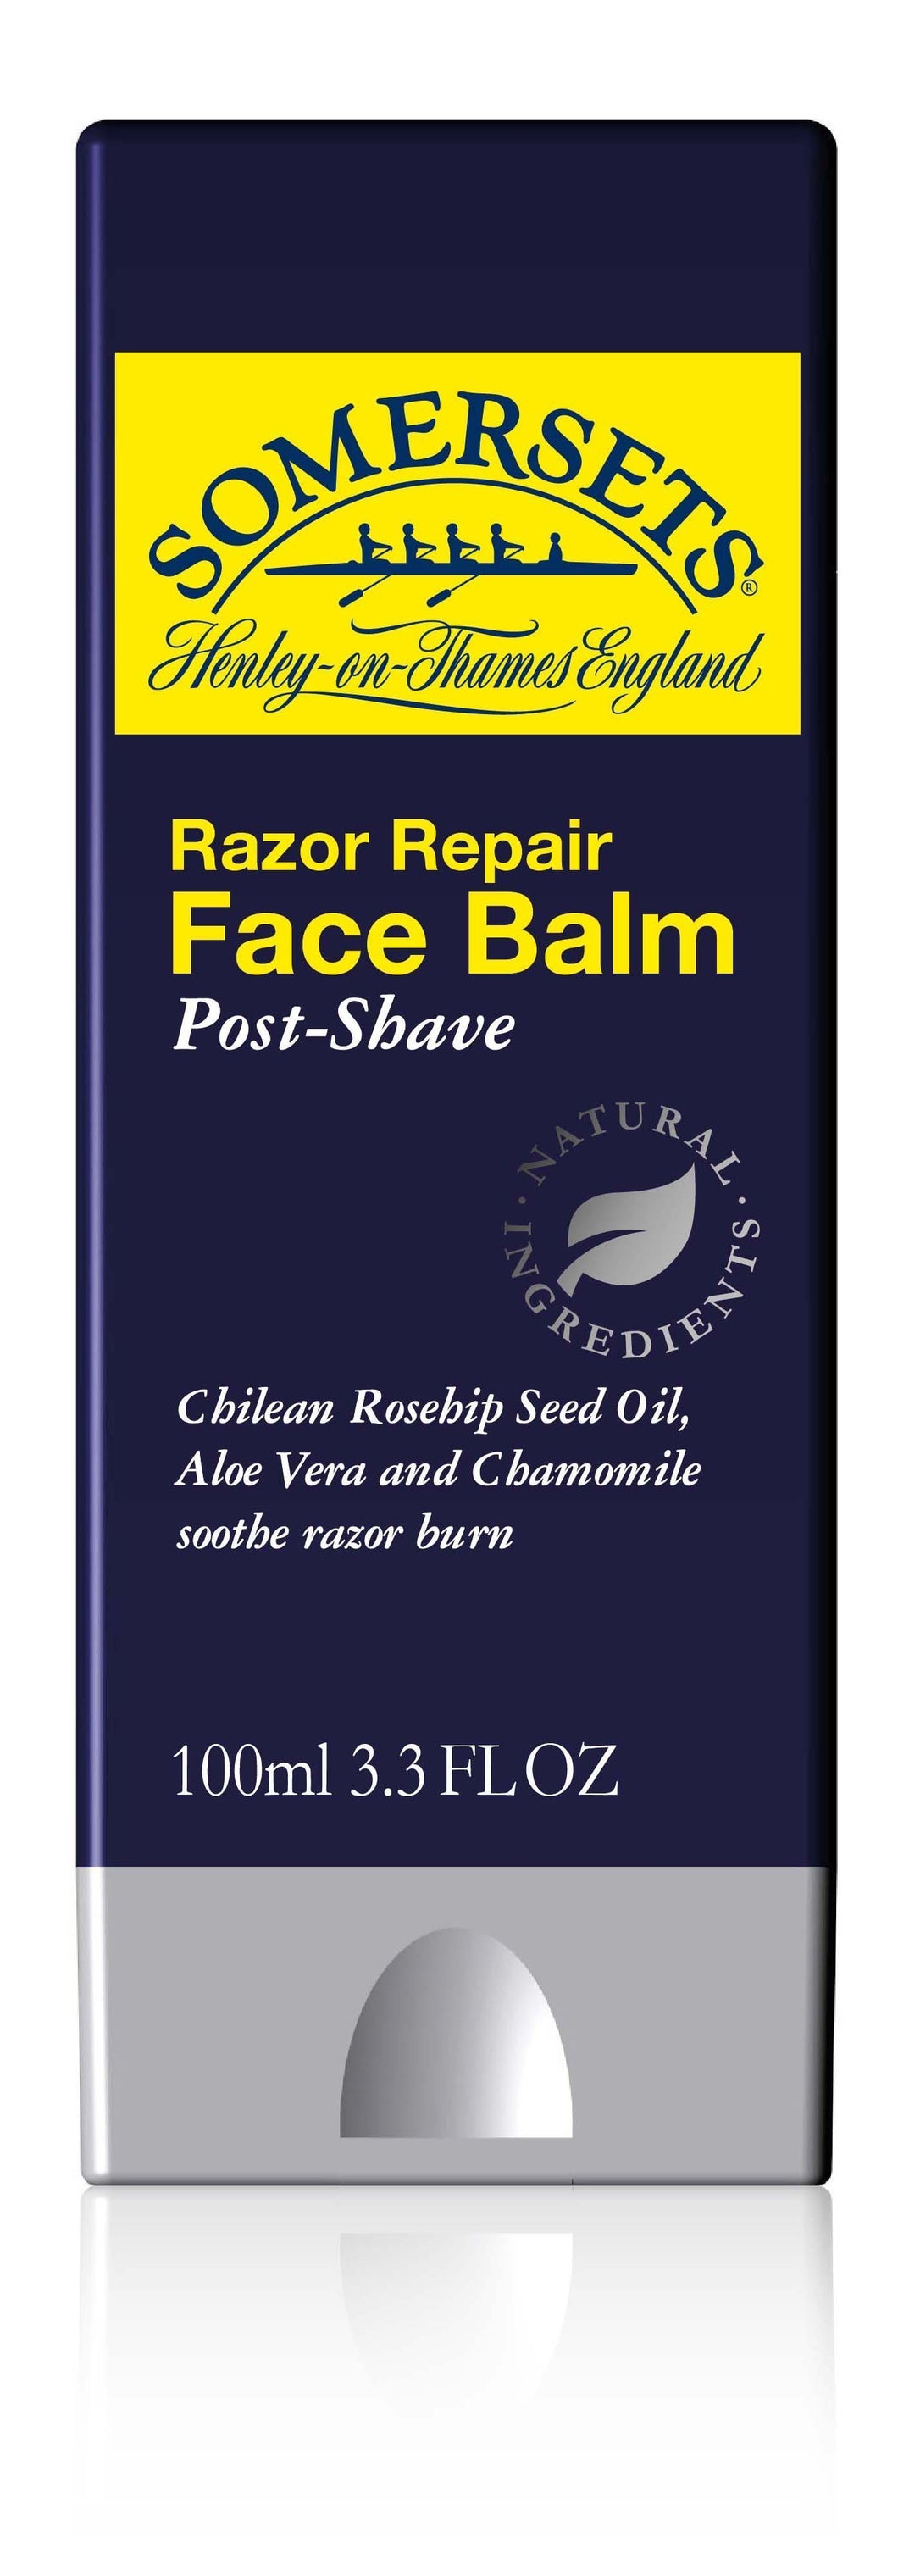 Somersets Post Shave Razor Repair Face Balm 100ml